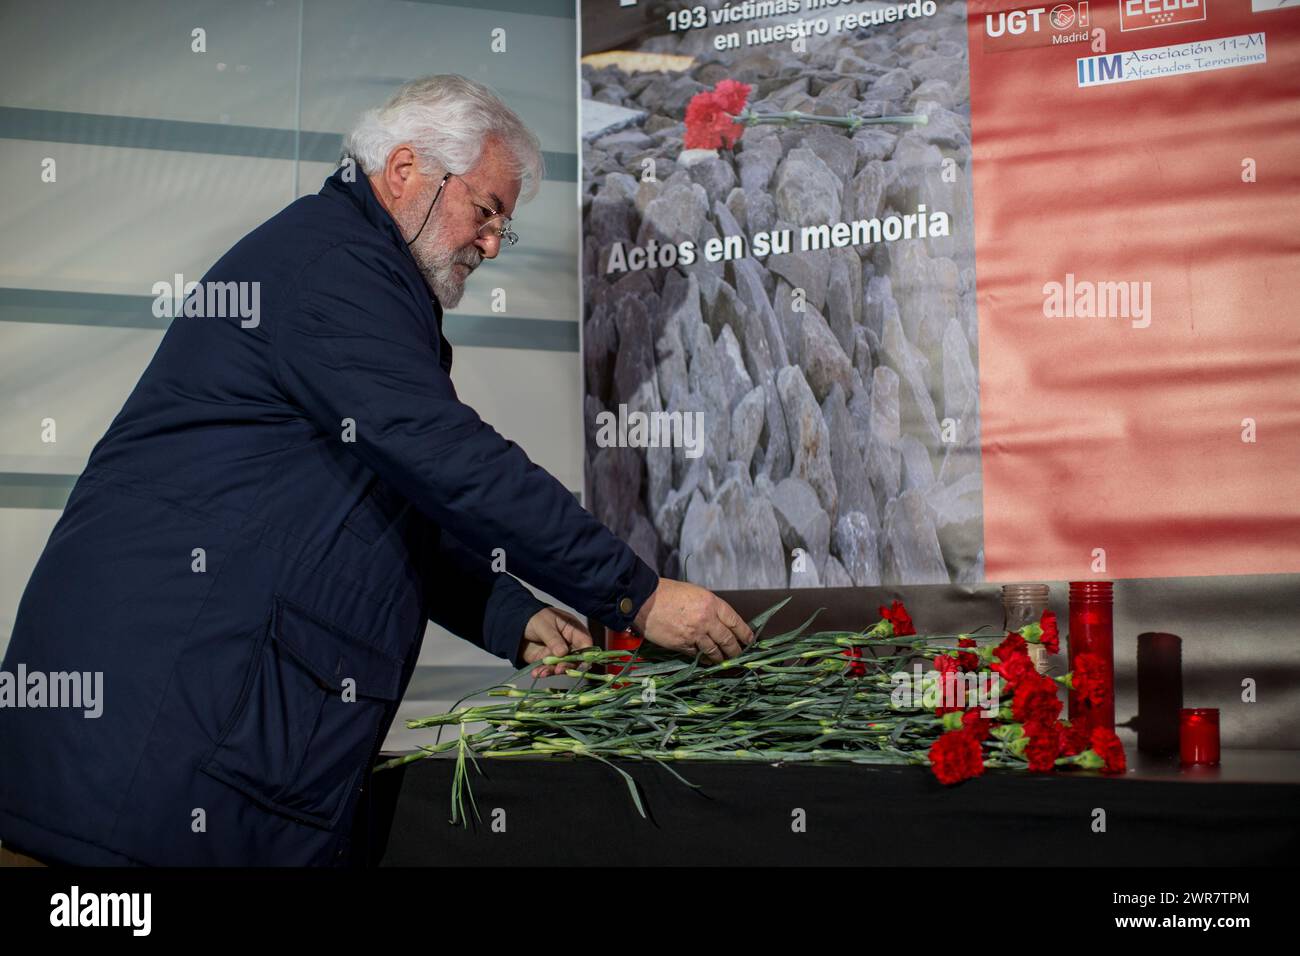 Madrid, Spain. 11th Mar, 2024. A man places a red carnation on an altar in front of a memorial to the victims of the train bombing inside the Atocha train station in Madrid, during the 20th anniversary of the terrorist attack. On March 11, 2004, several terrorist attacks occurred in Madrid, leaving 193 people dead and around 2,000 injured. (Photo by Luis Soto/SOPA Images/Sipa USA) Credit: Sipa USA/Alamy Live News Stock Photo